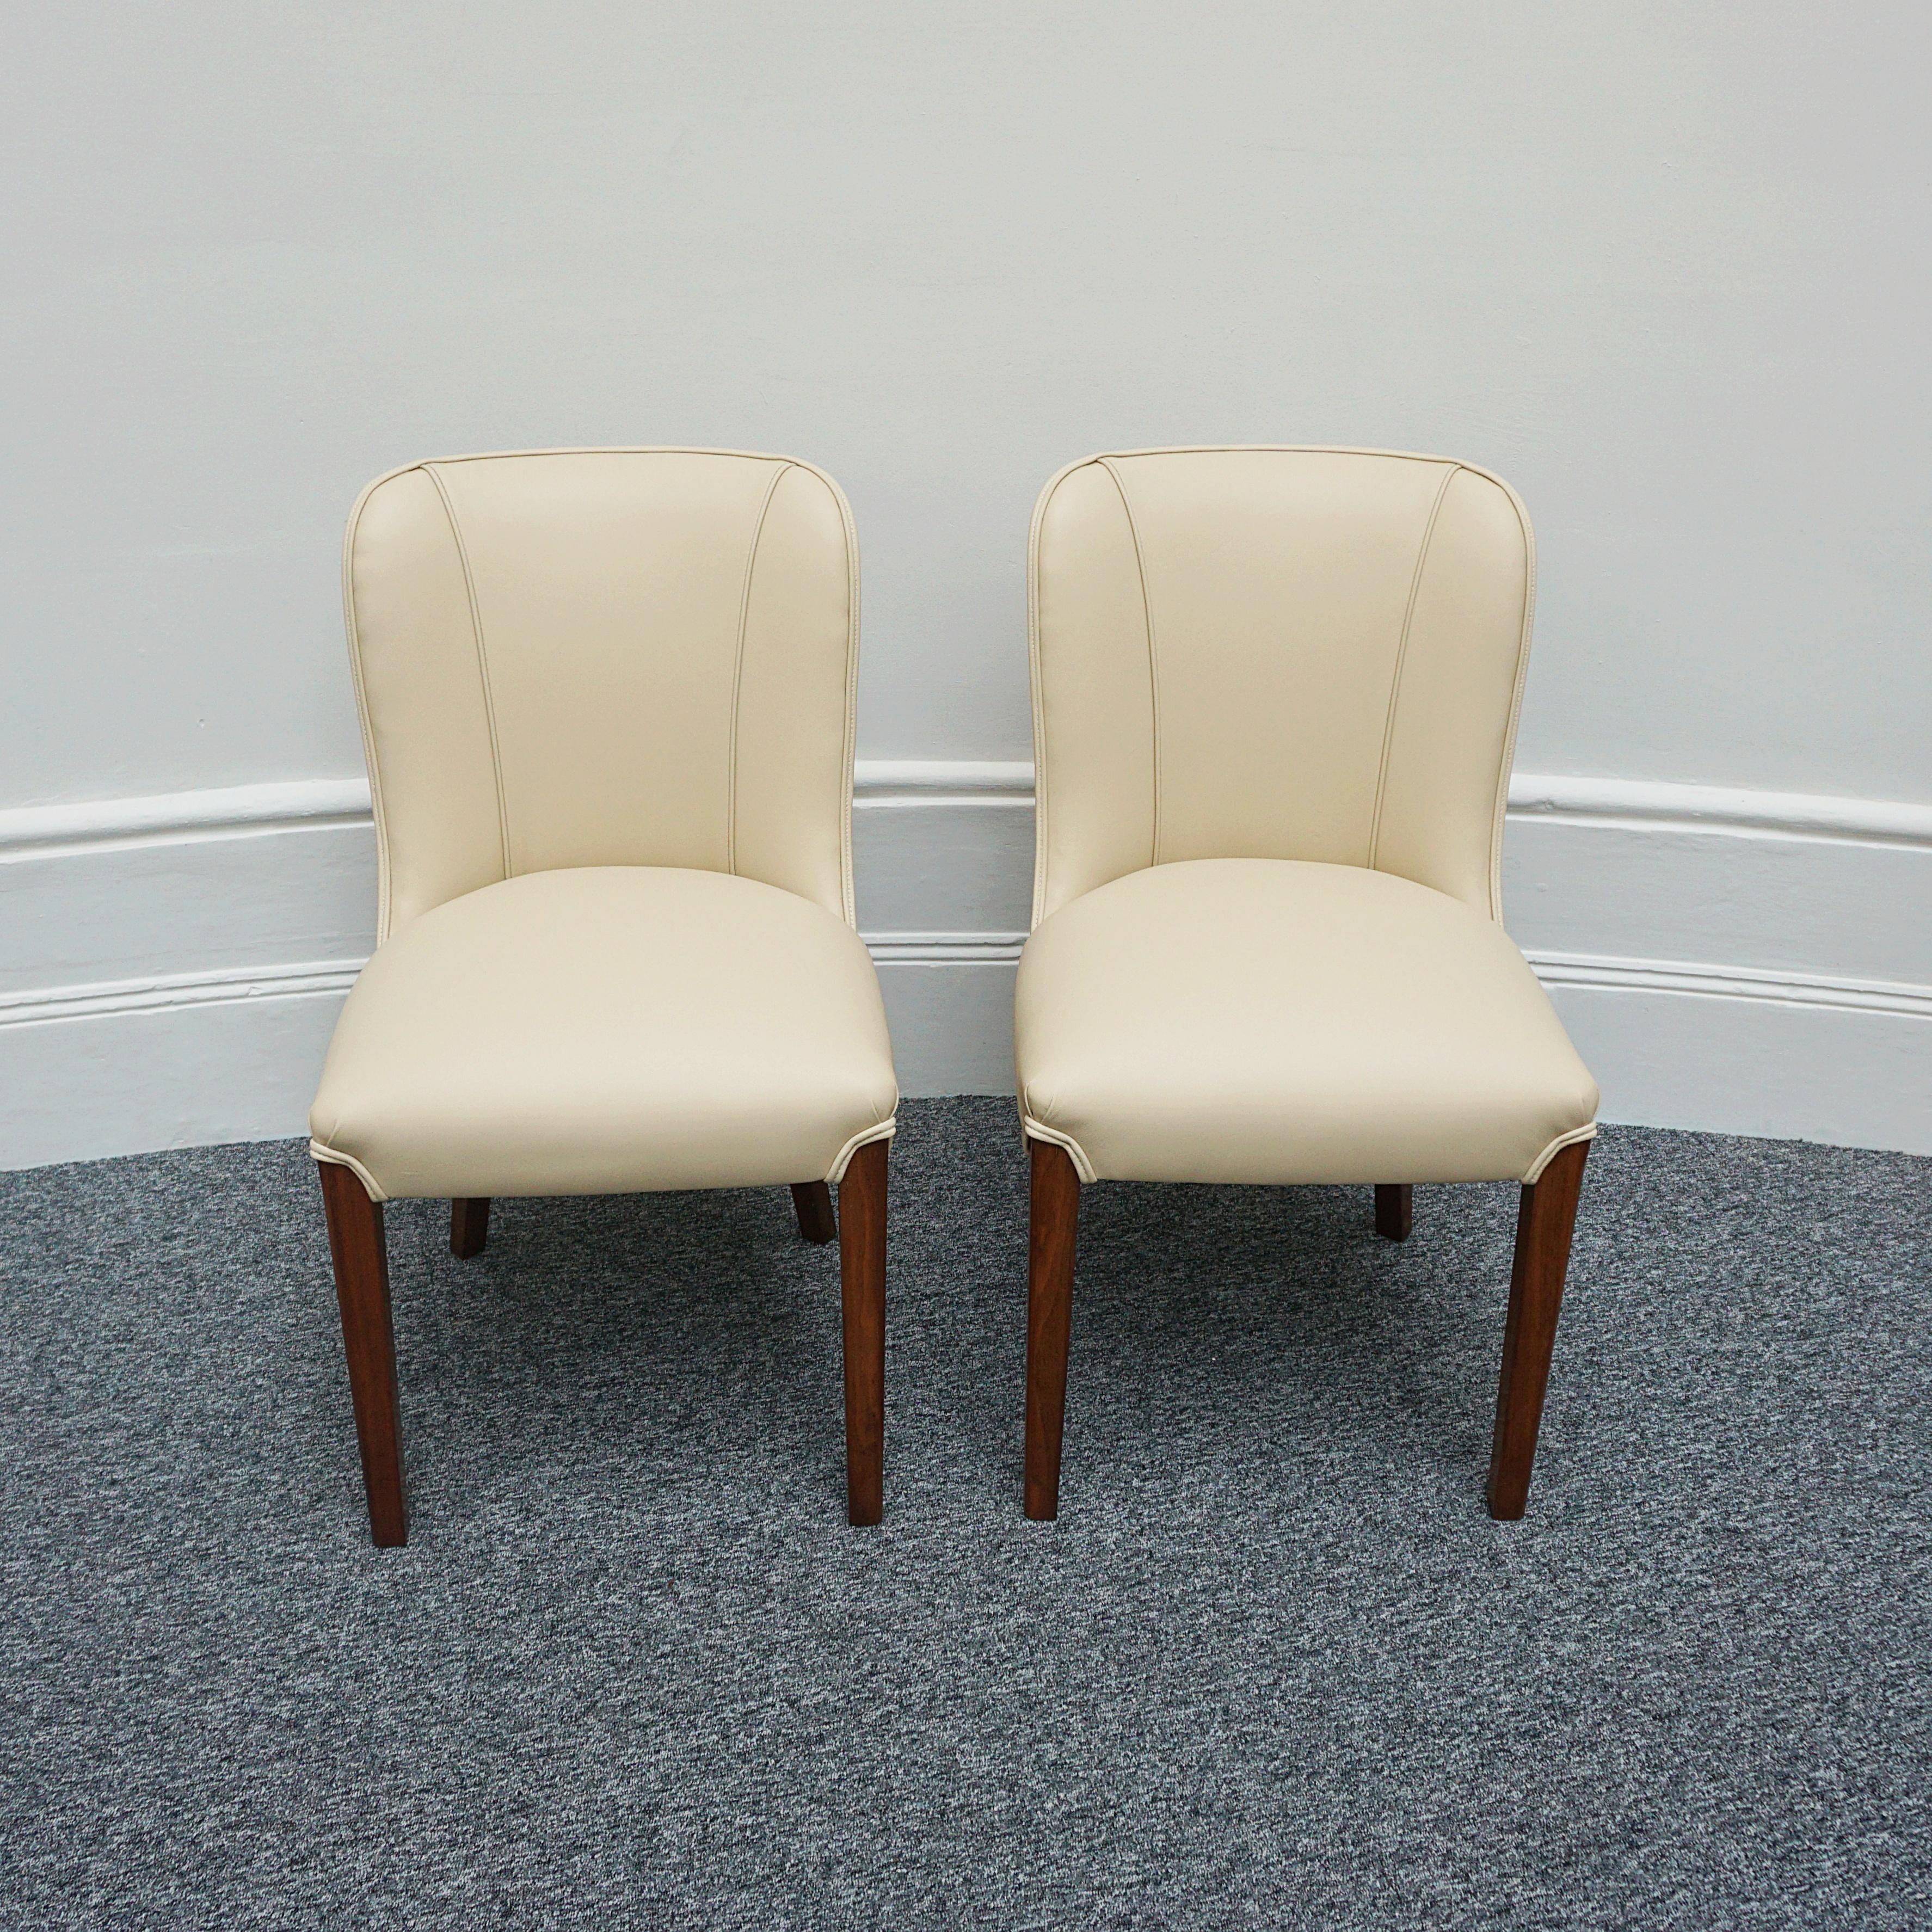 Mid-20th Century Pair of Art Deco Burr Walnut and Cream Leather Side Chairs circa 1930